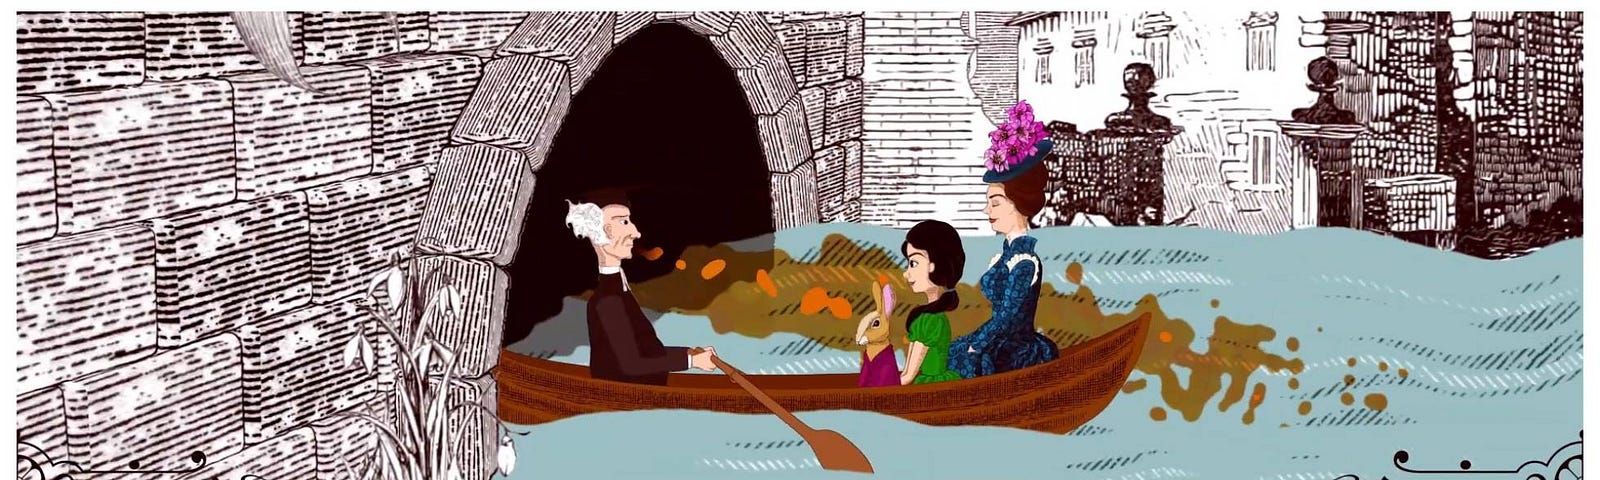 An illustration of Alice being rowed along the river to explore Oxford’s sewers.